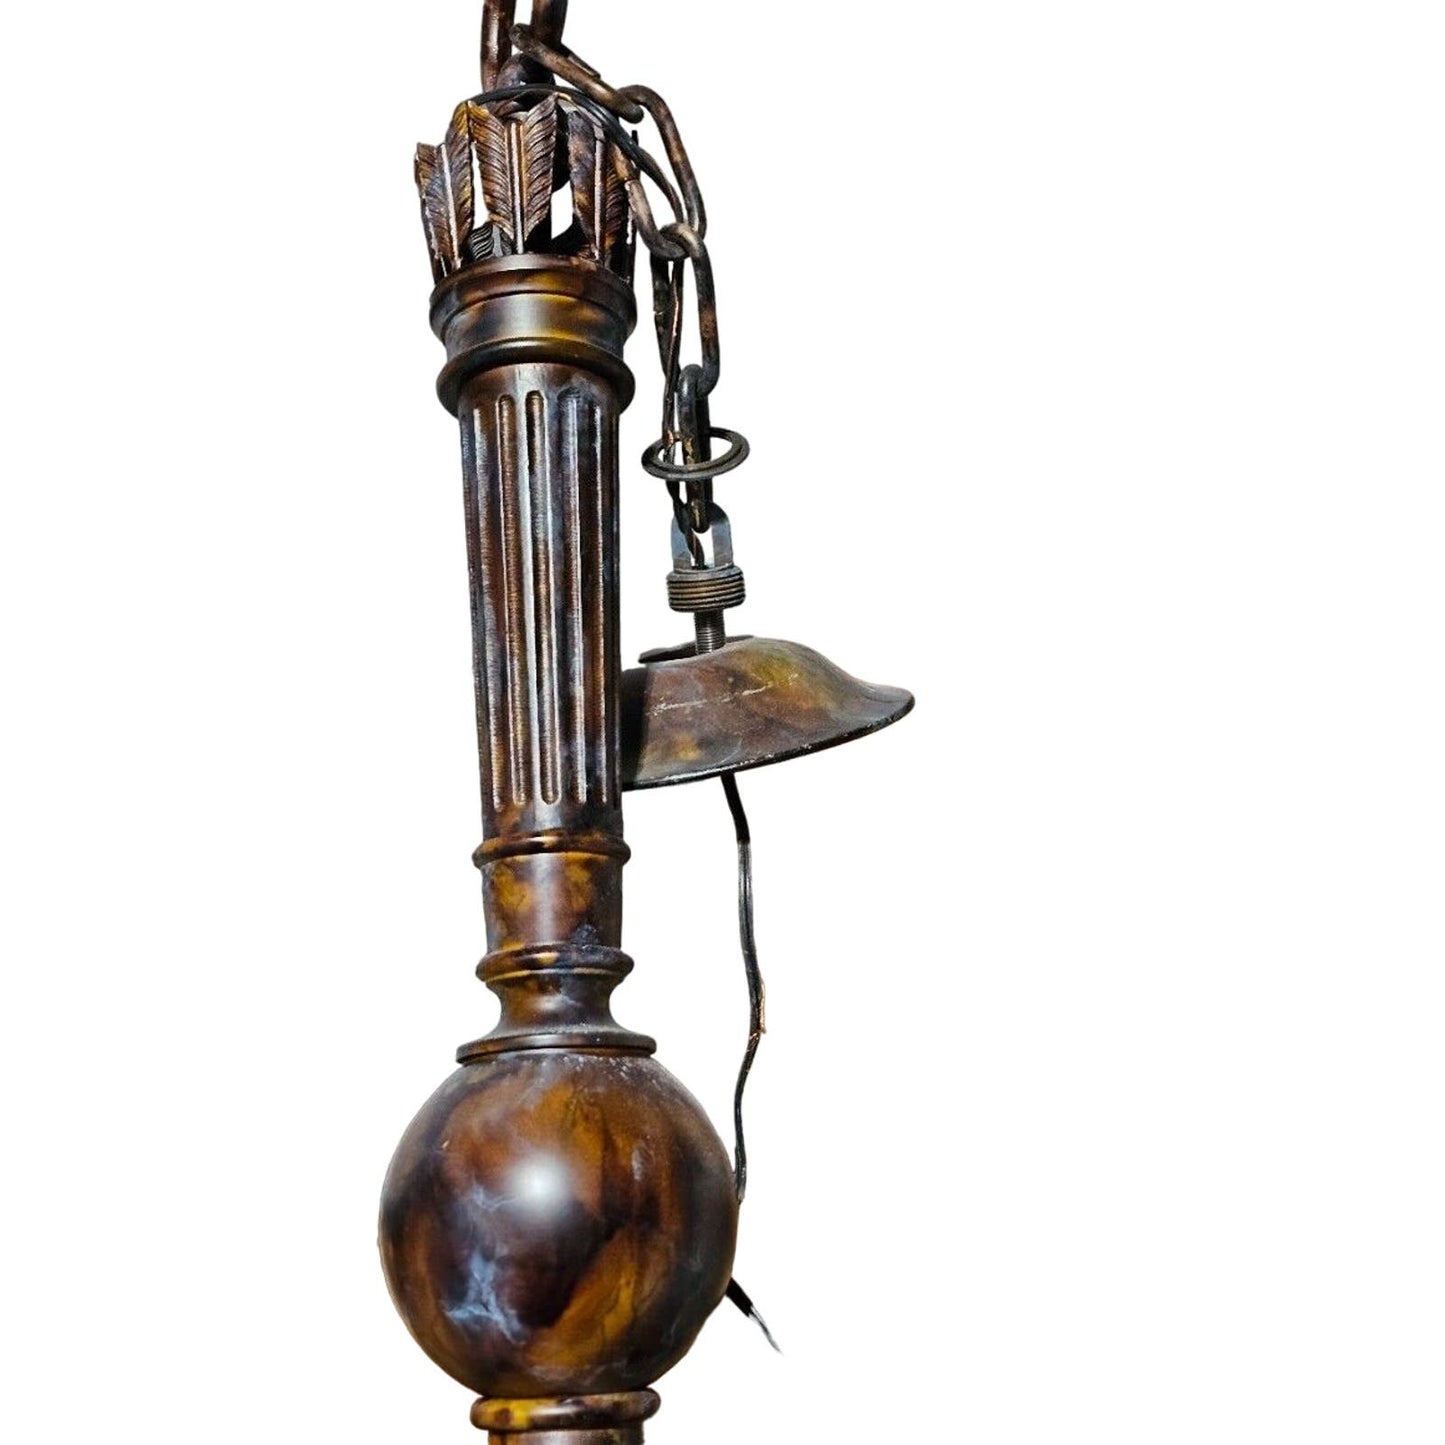 David Michael - Traditional 8 Candle Solid Bronze Casting Chandelier